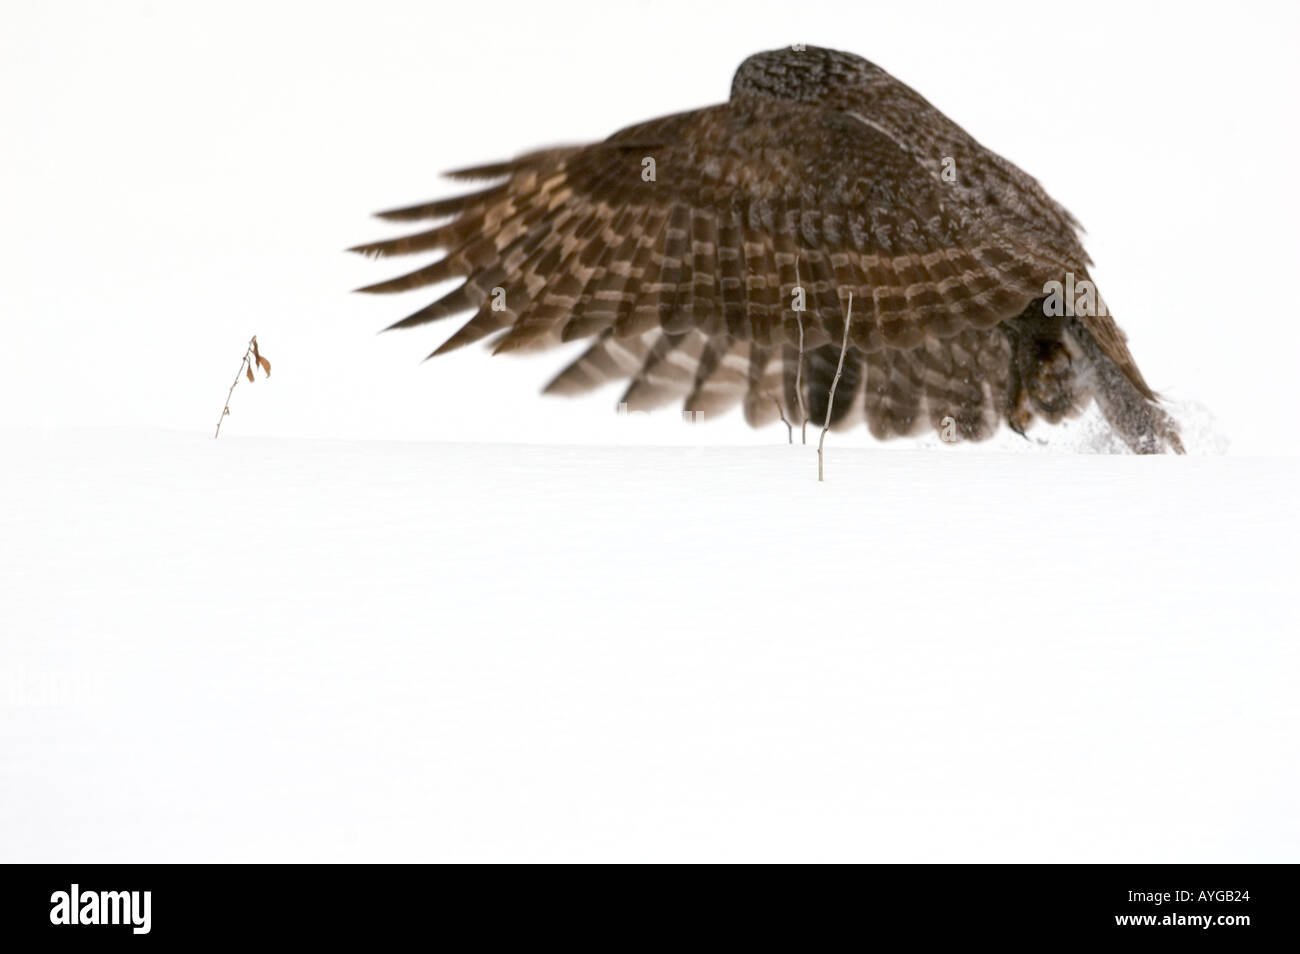 A Great Gray Owl flys up from snow covered ground after trying to catch prey Stock Photo